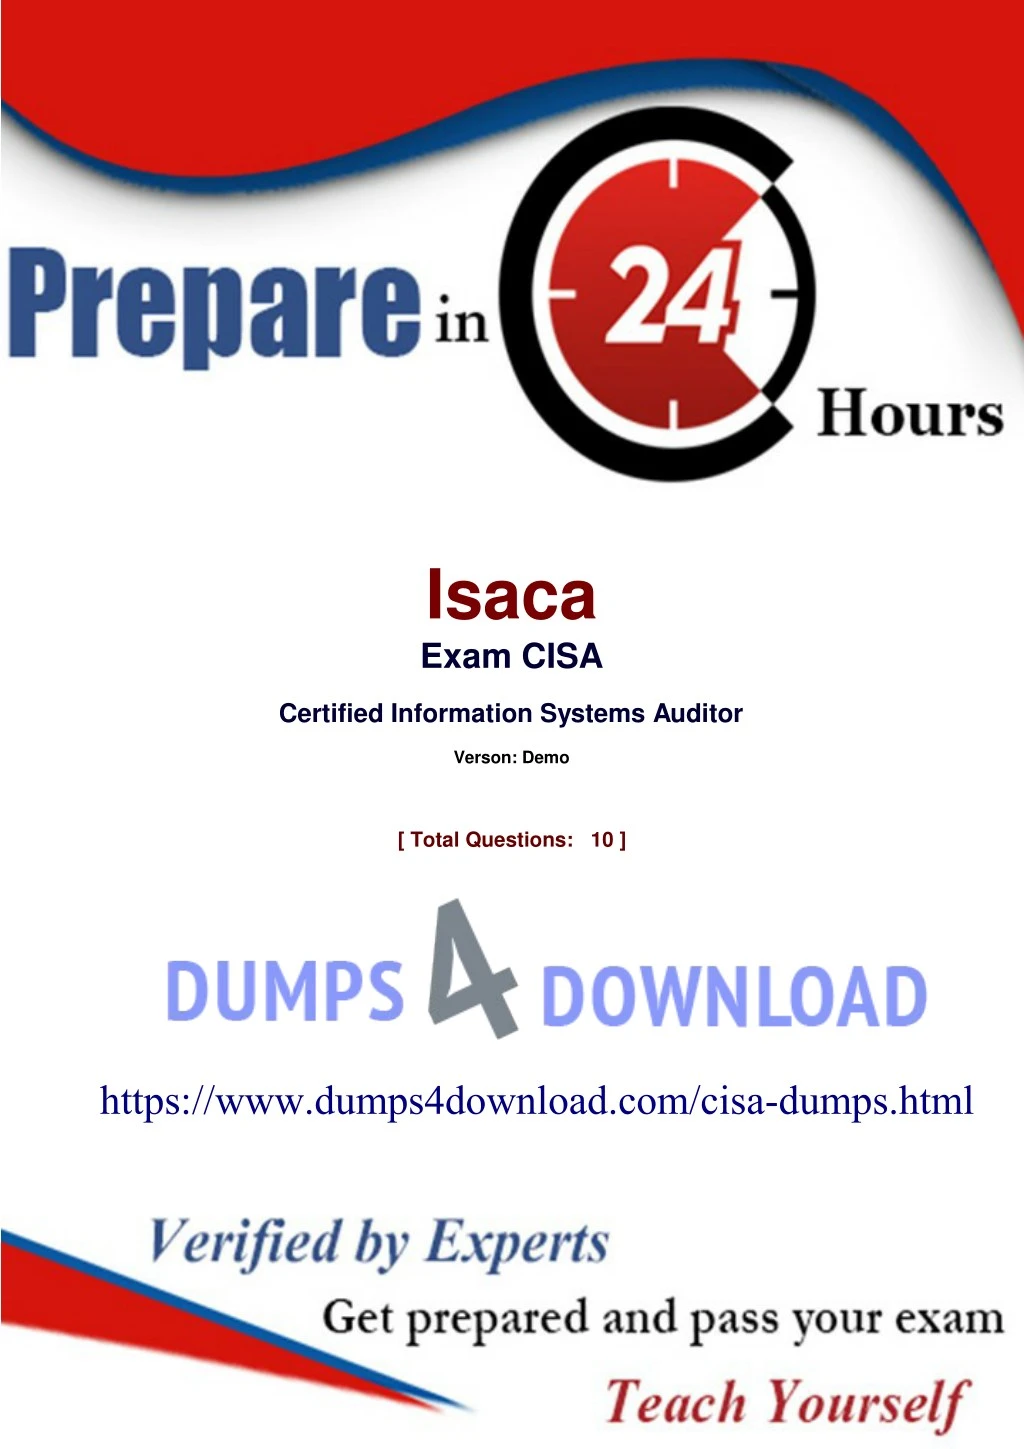 PPT Released CISA Isaca Certified Information Systems Auditor Exam